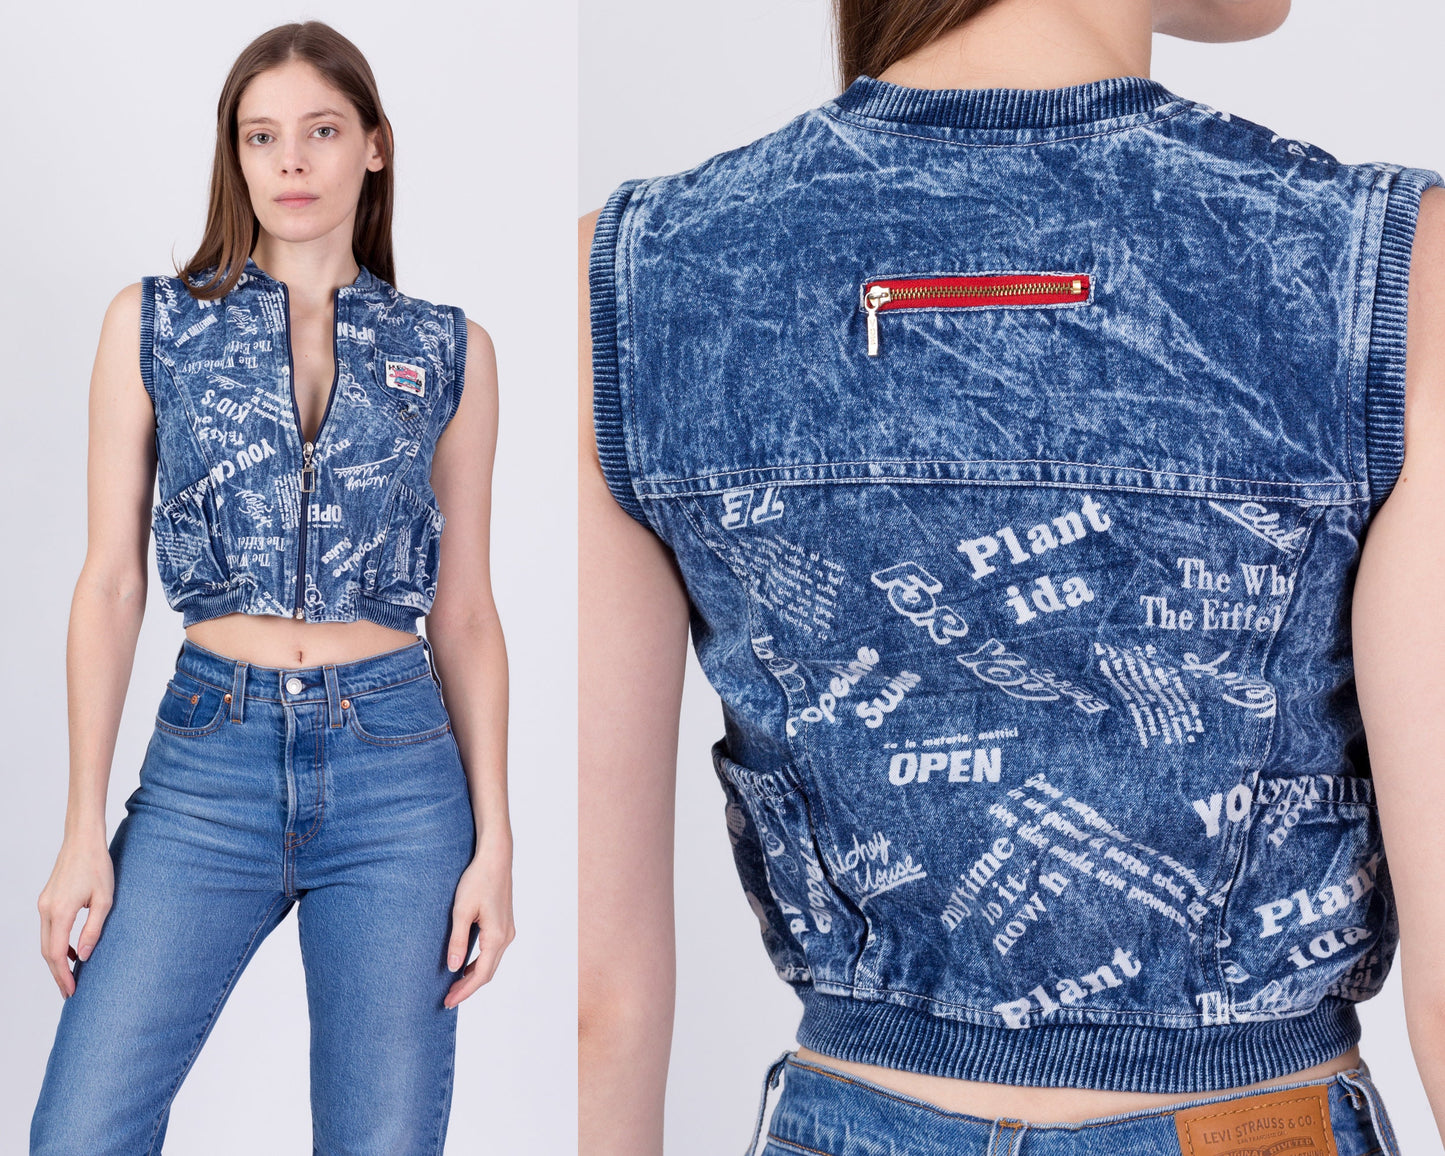 80s Acid Wash Streetwear Graphic Crop Top - Extra Small 